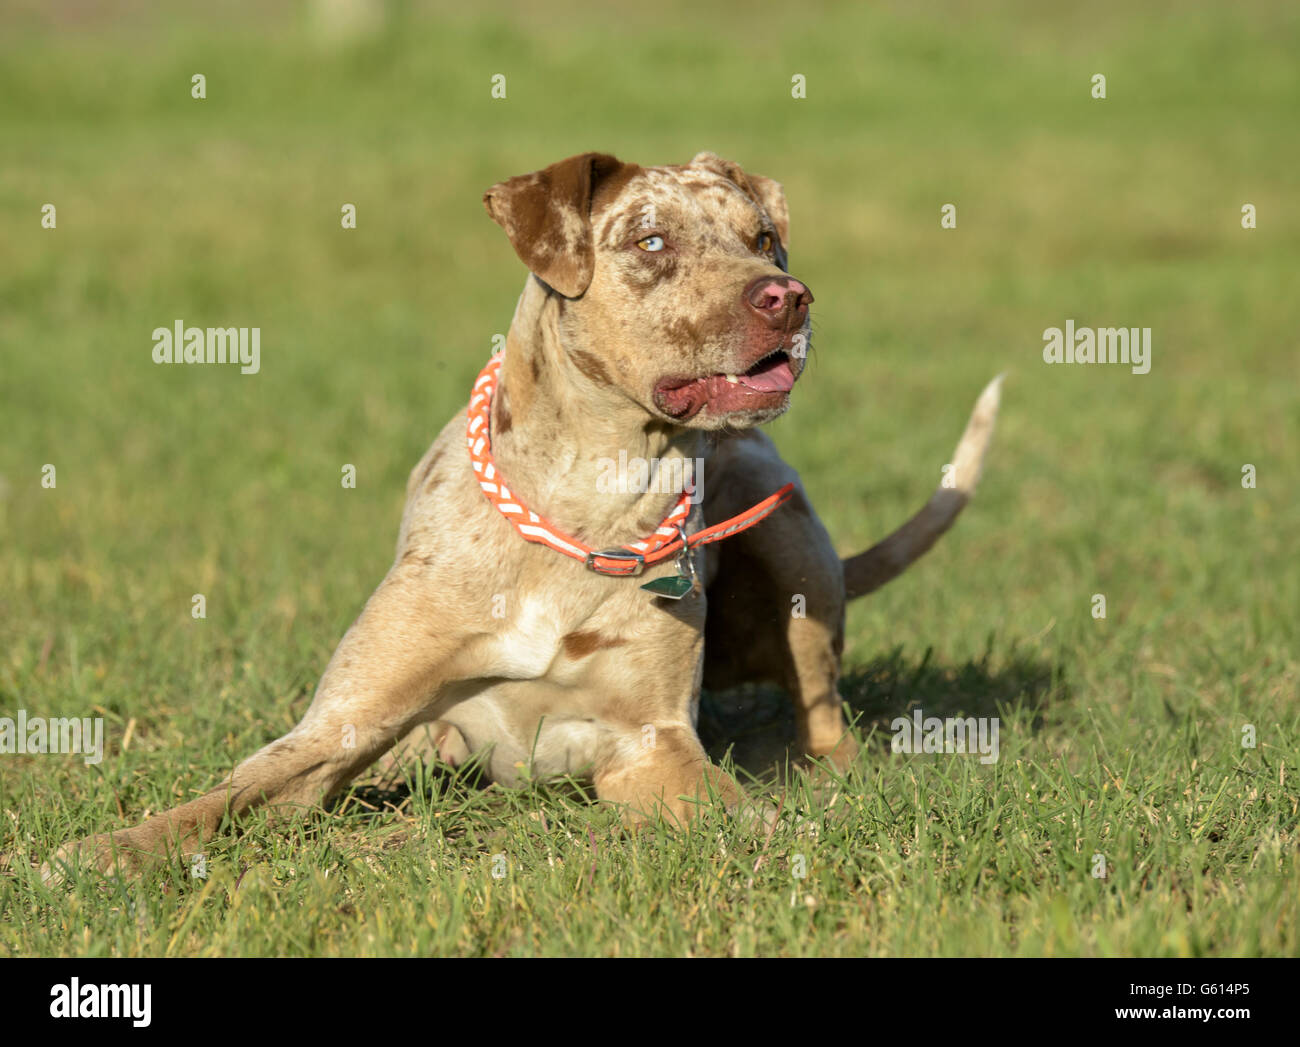 Catahoula leopard hound dog on lawn, 18 month old male Stock Photo